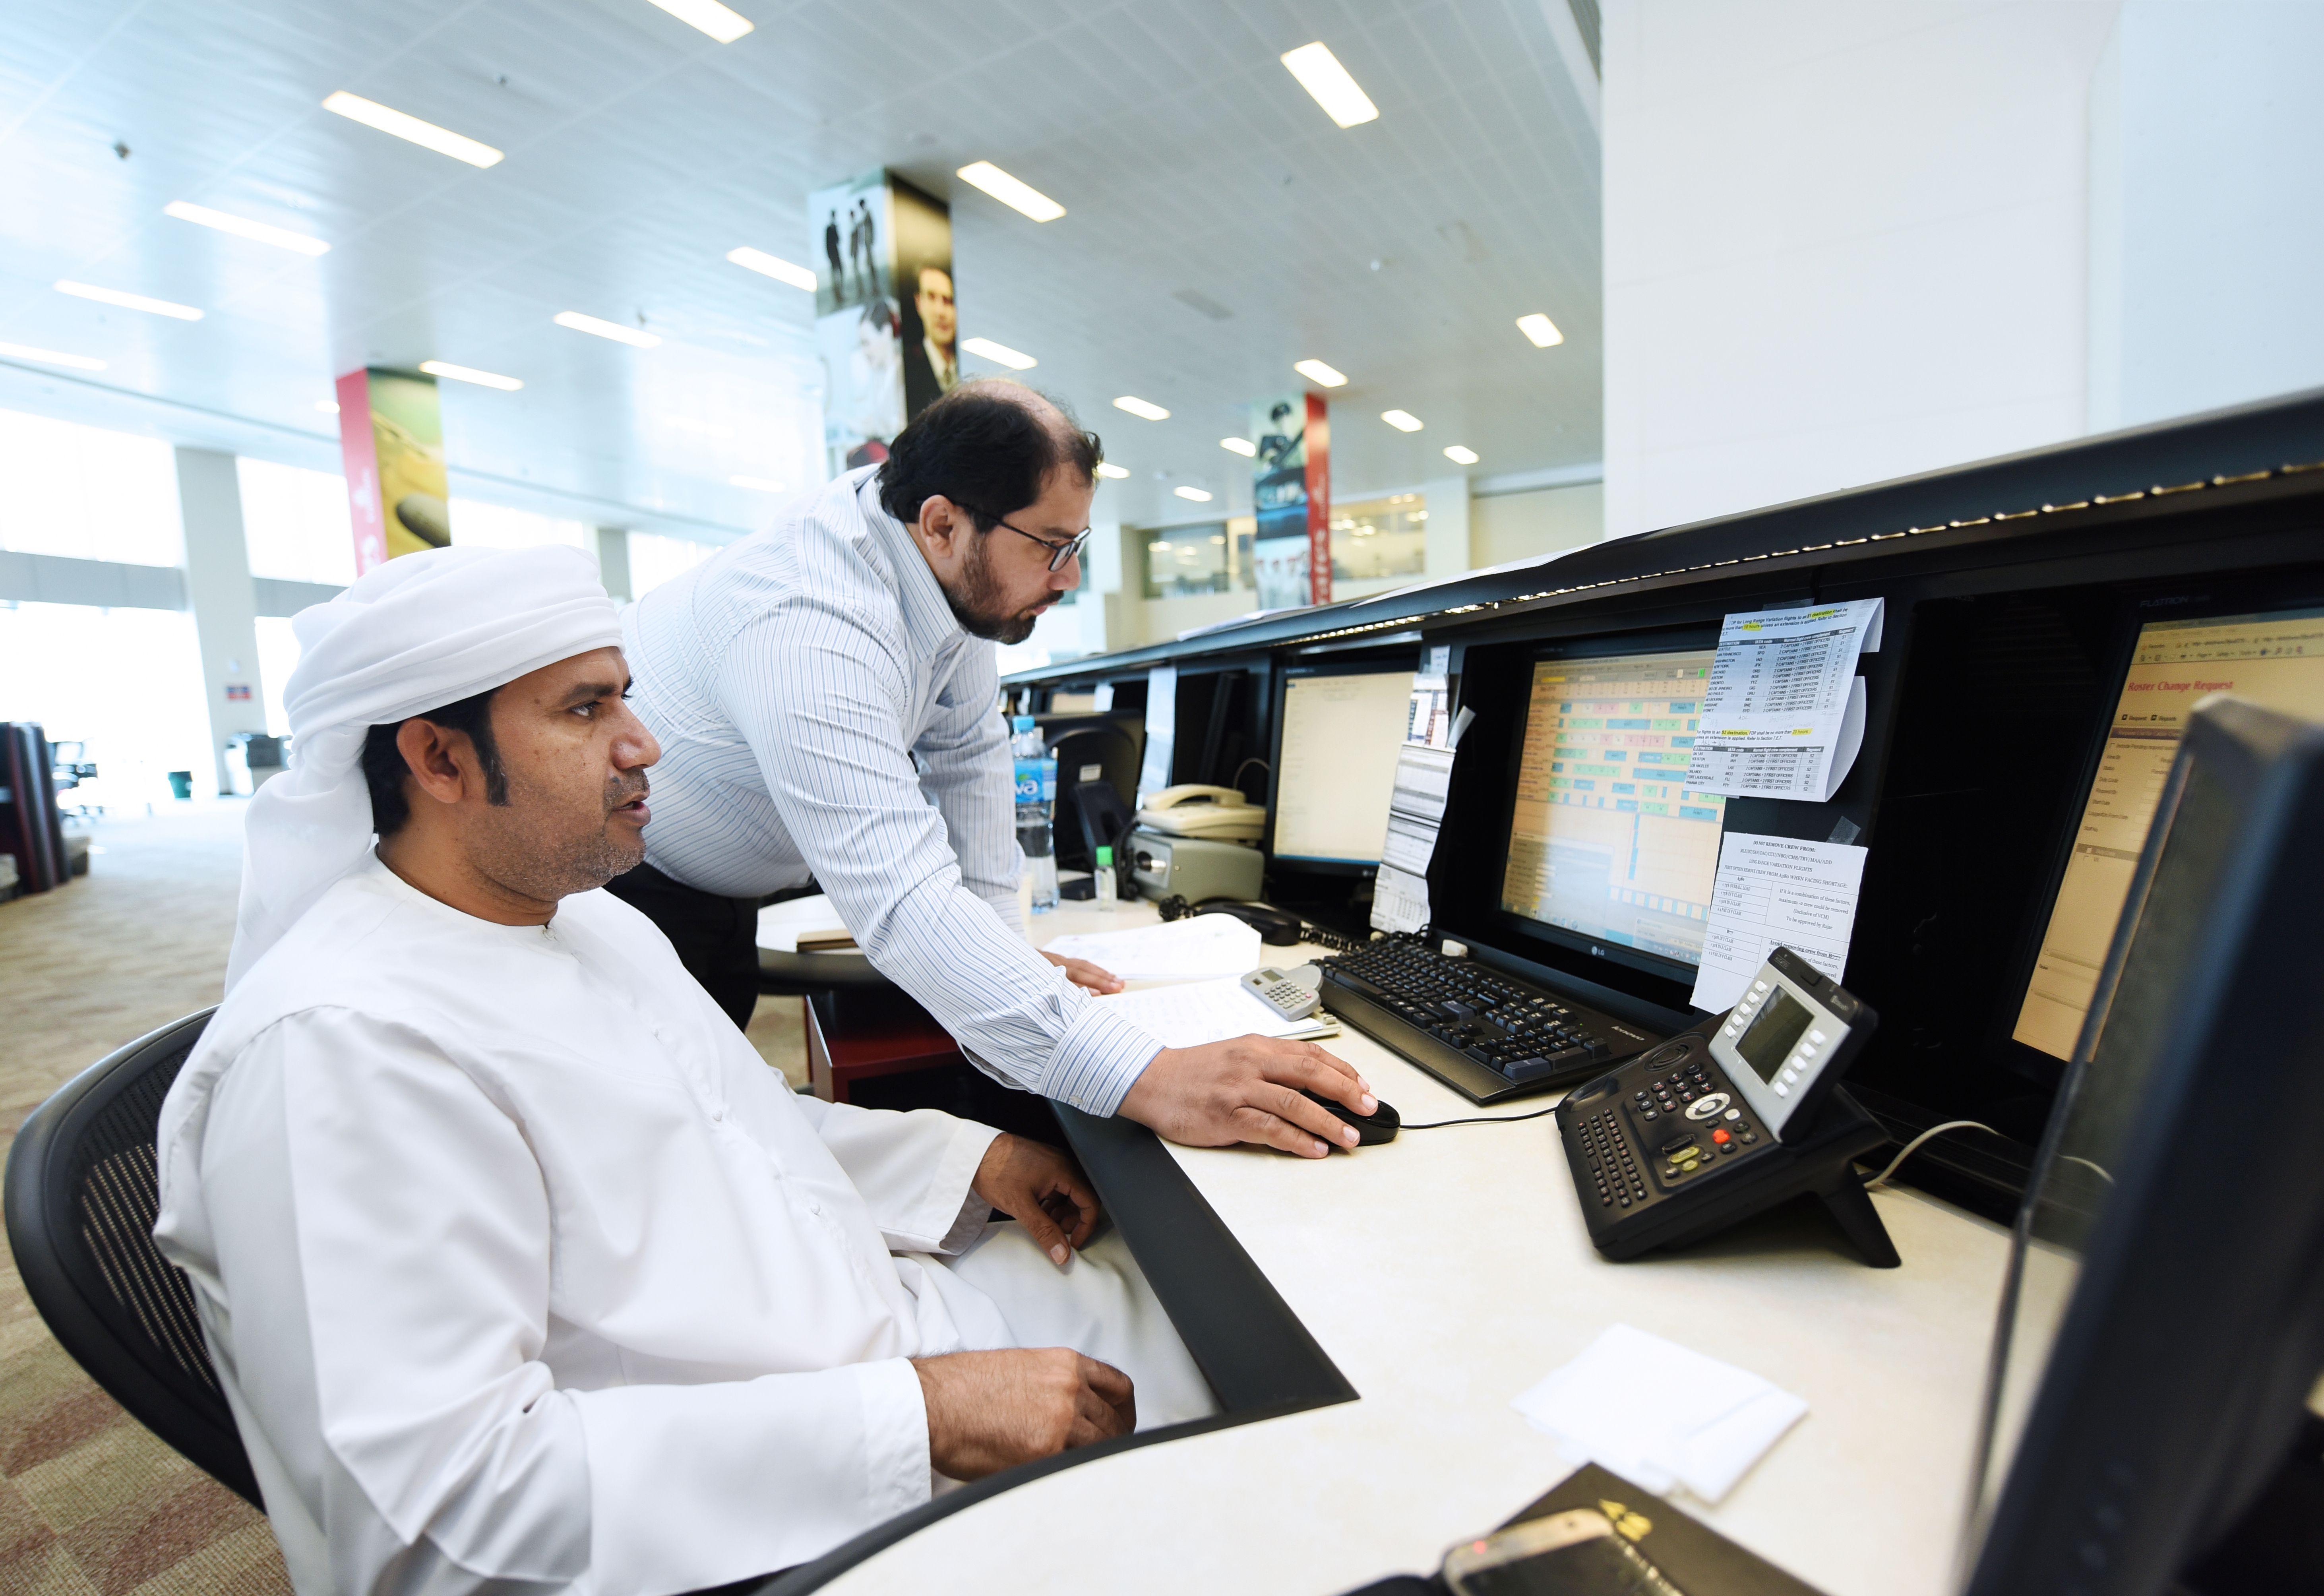 Network Control: Inside The Emirates Operations Nerve Center